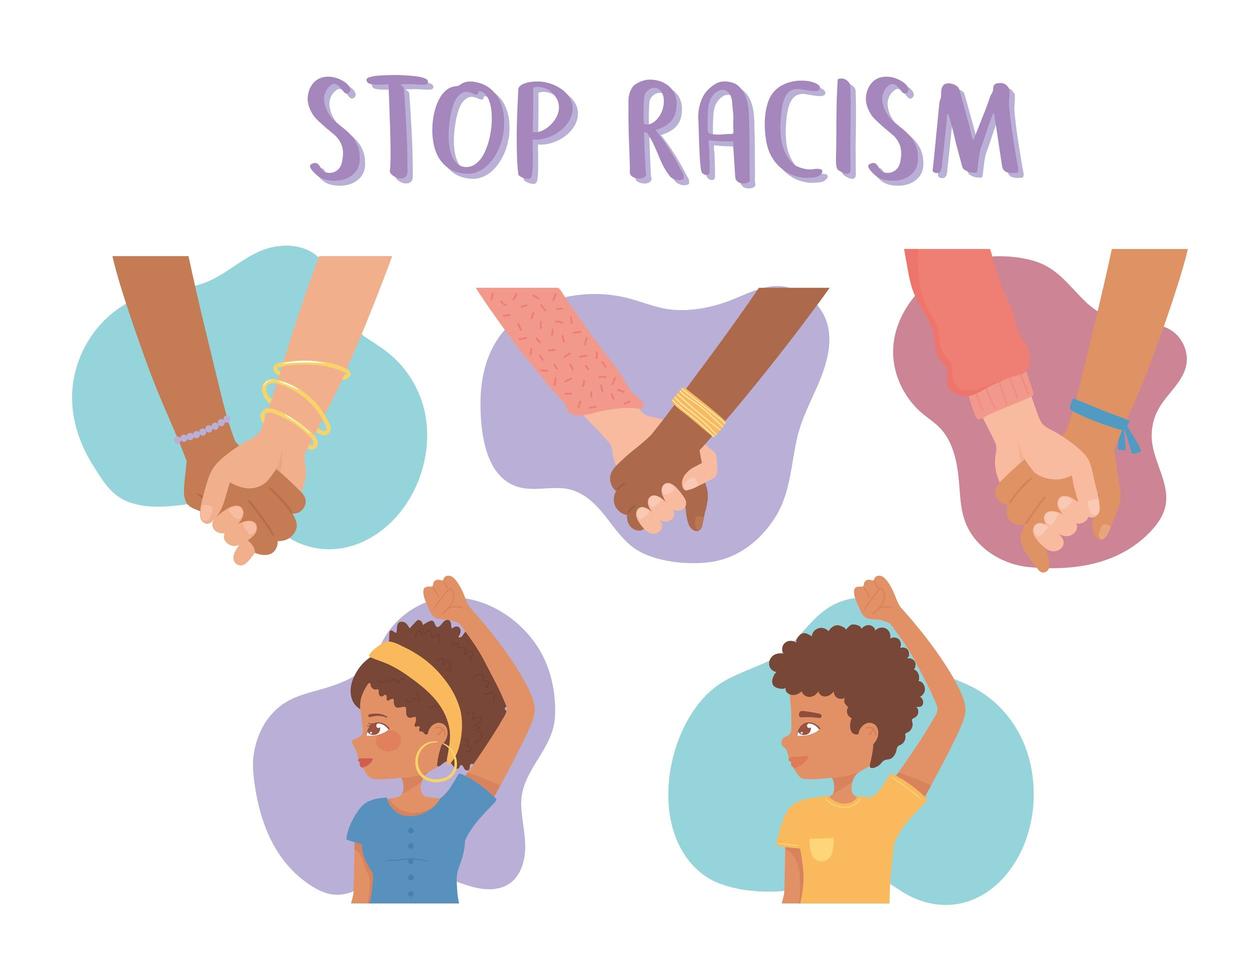 stop racism afro american people and diversity hands together vector